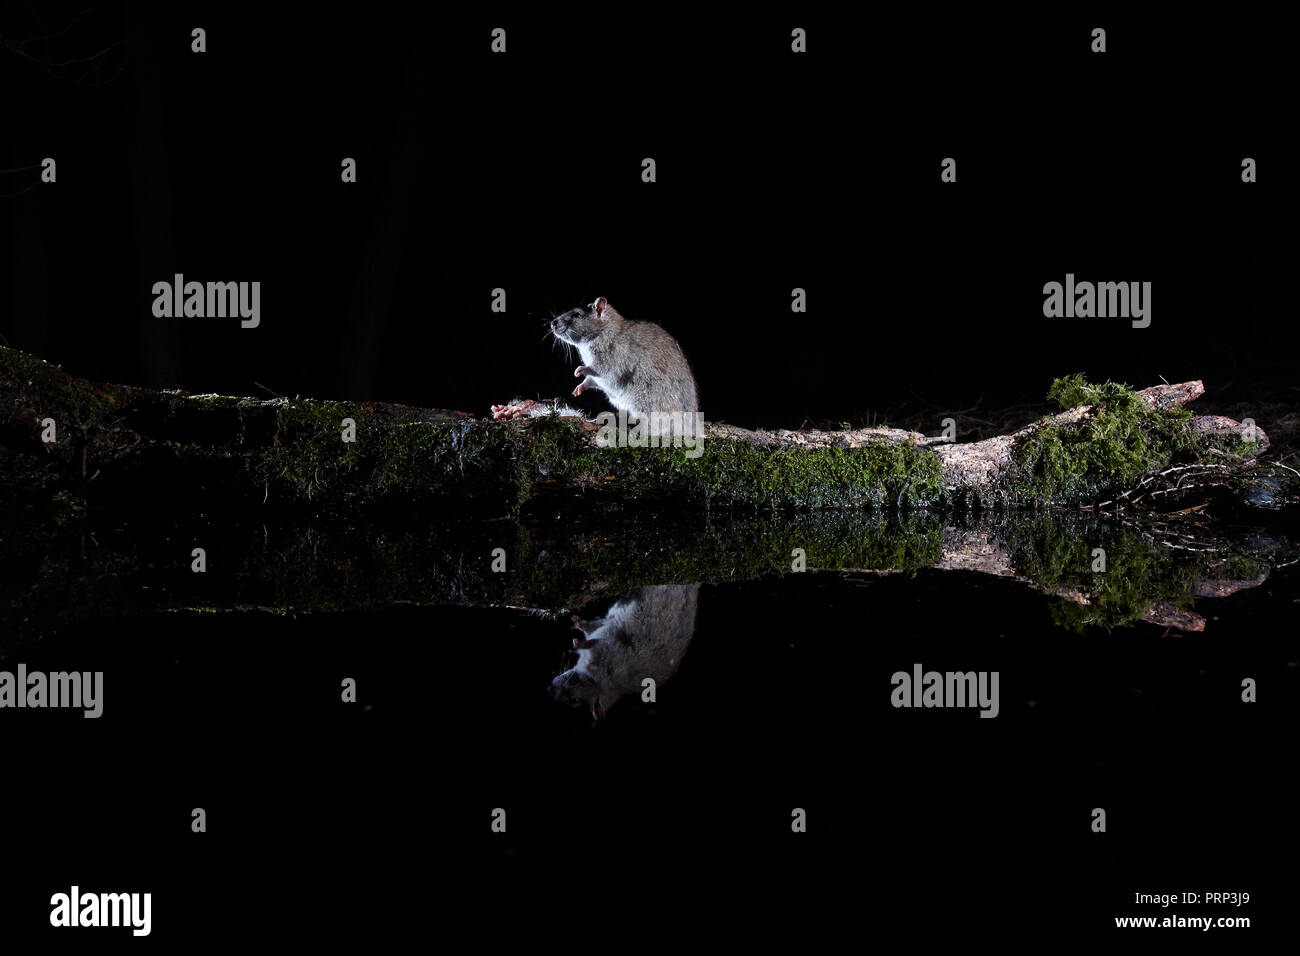 Two Brown rats, Rattus norvegicus, eating carrion reflected in a pool. Photographed using a remote DSLR wildlife camera trap and flash. Stock Photo